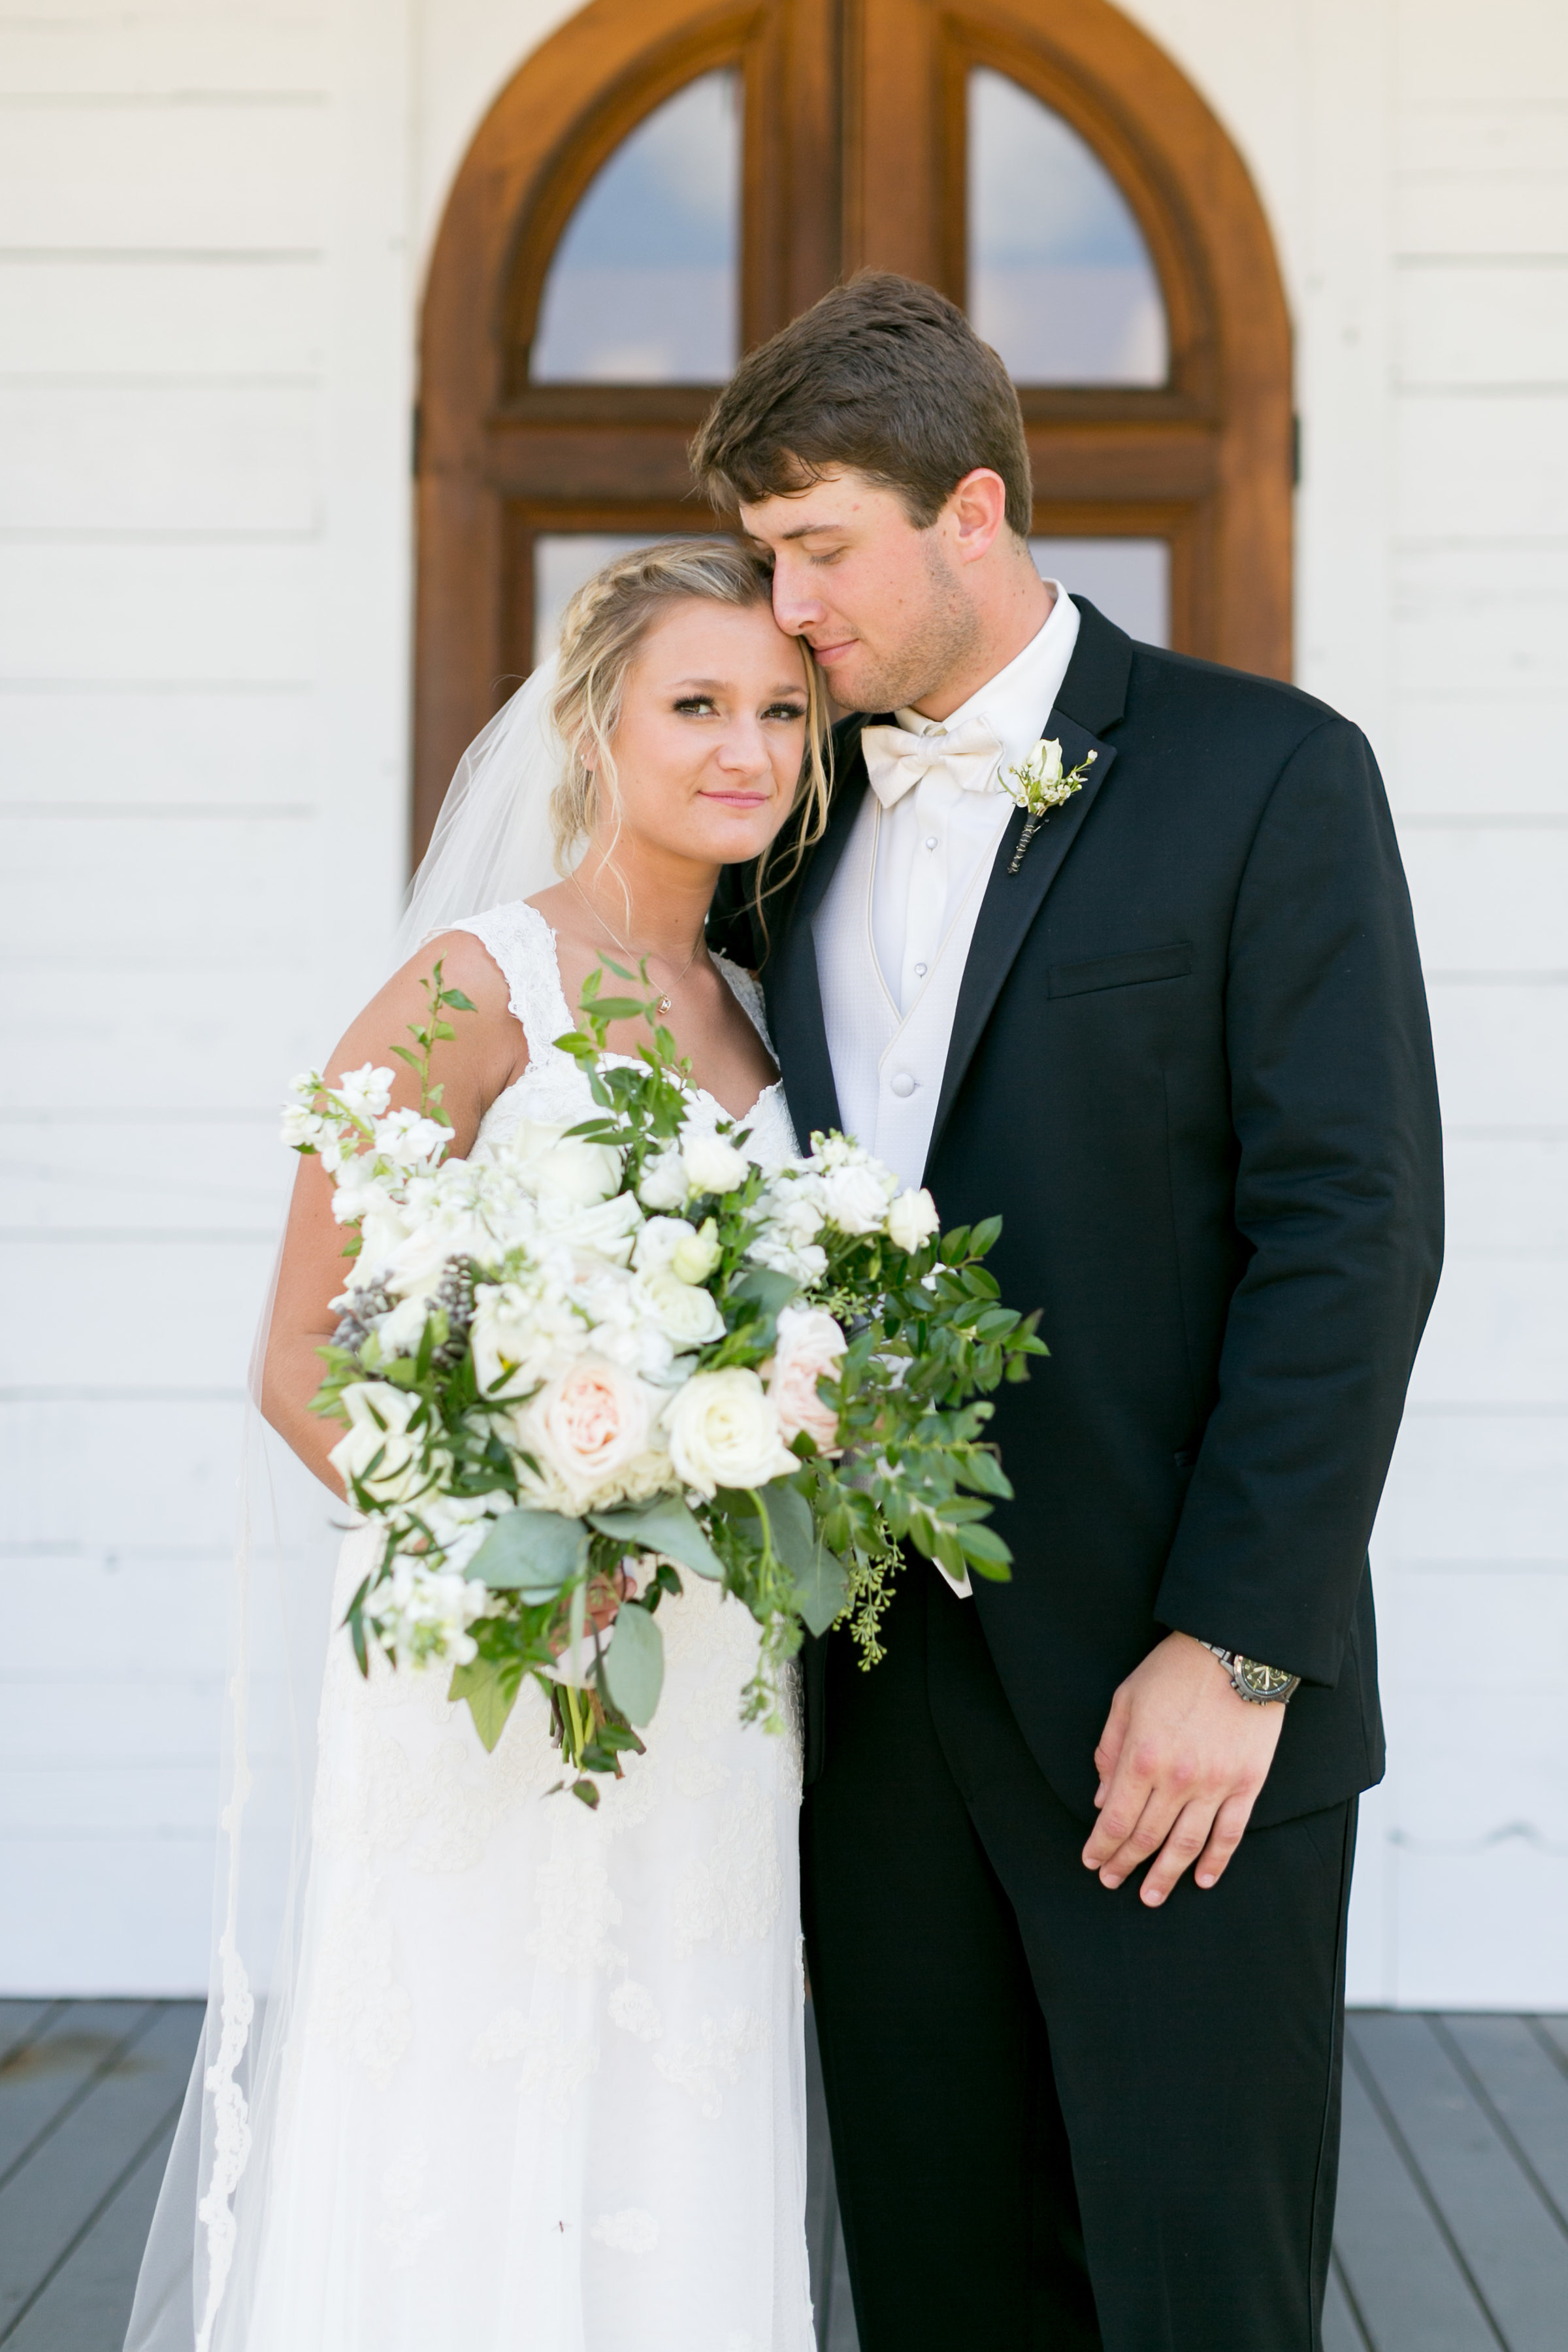 Classic southern wedding and calligraphy in oxford mississippi